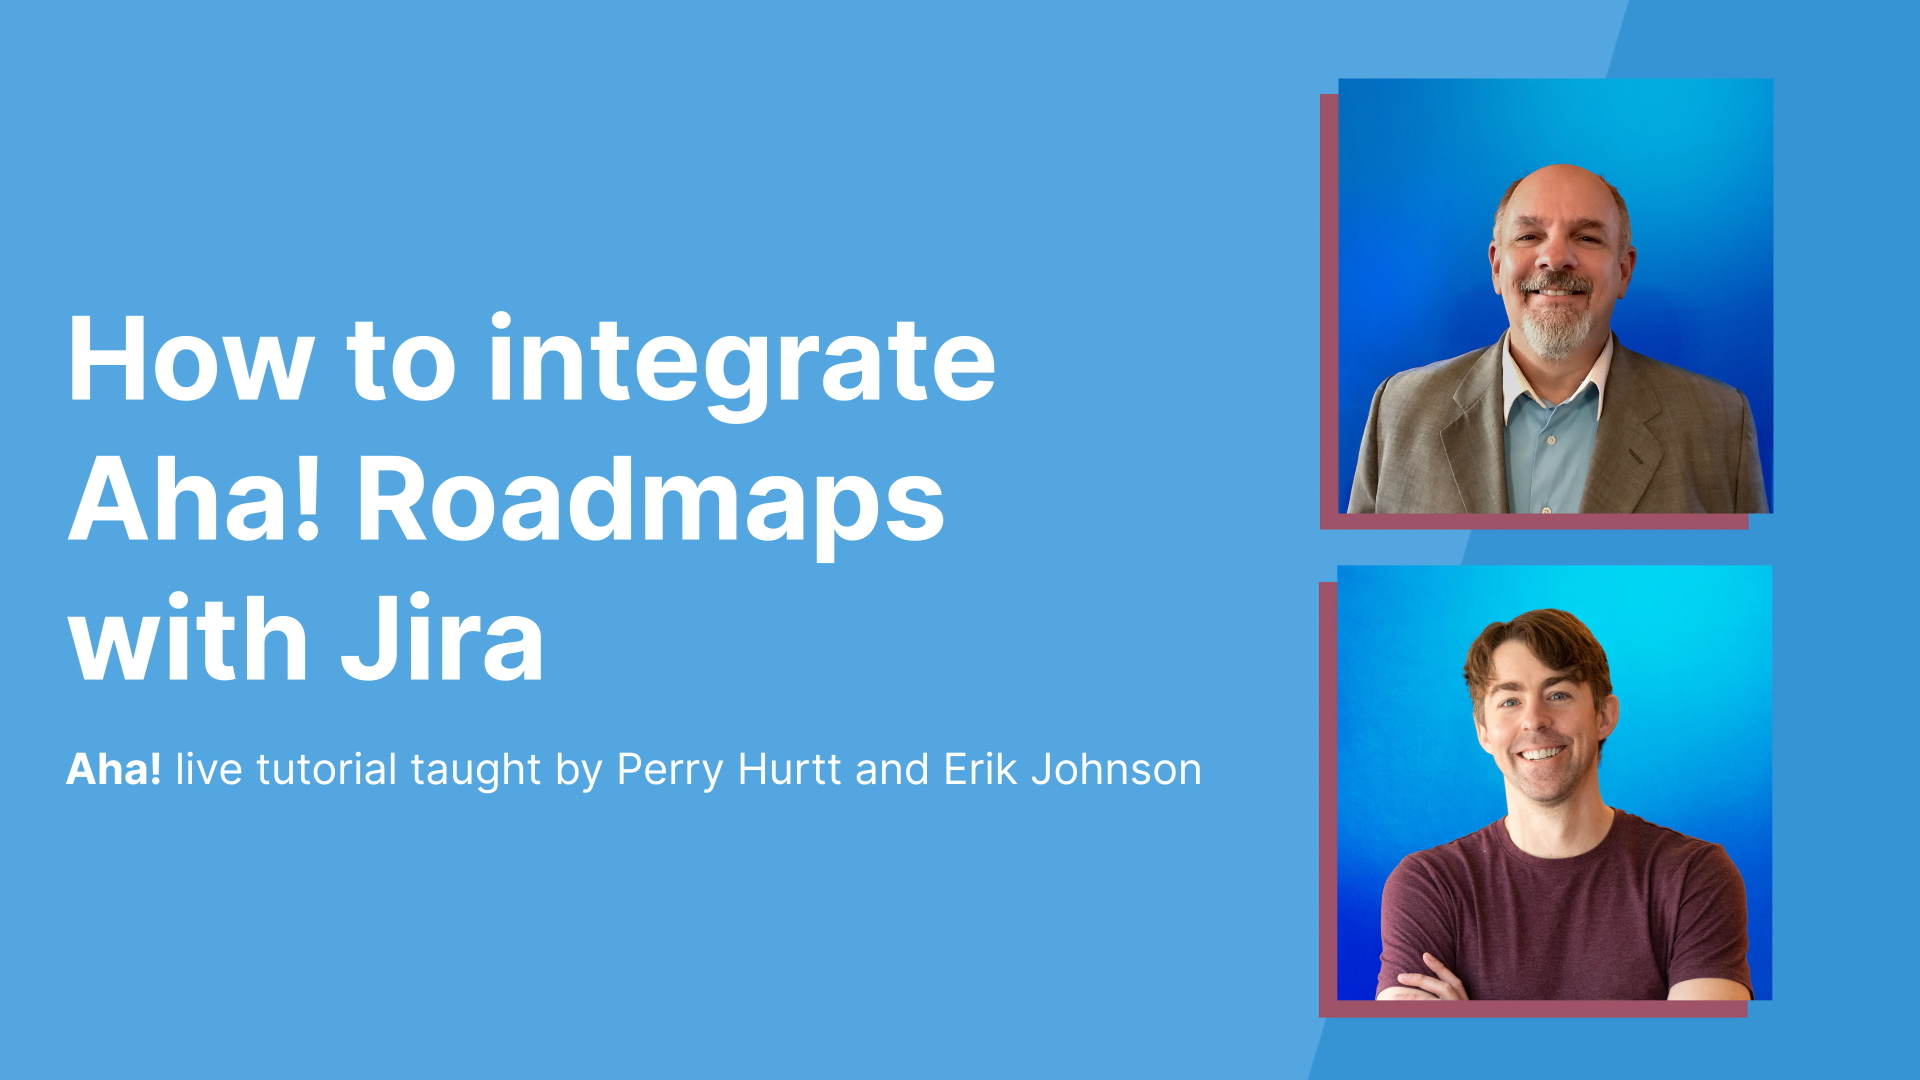 Thumbnail image for the tutorial about integrating Aha! Roadmaps with Jira.